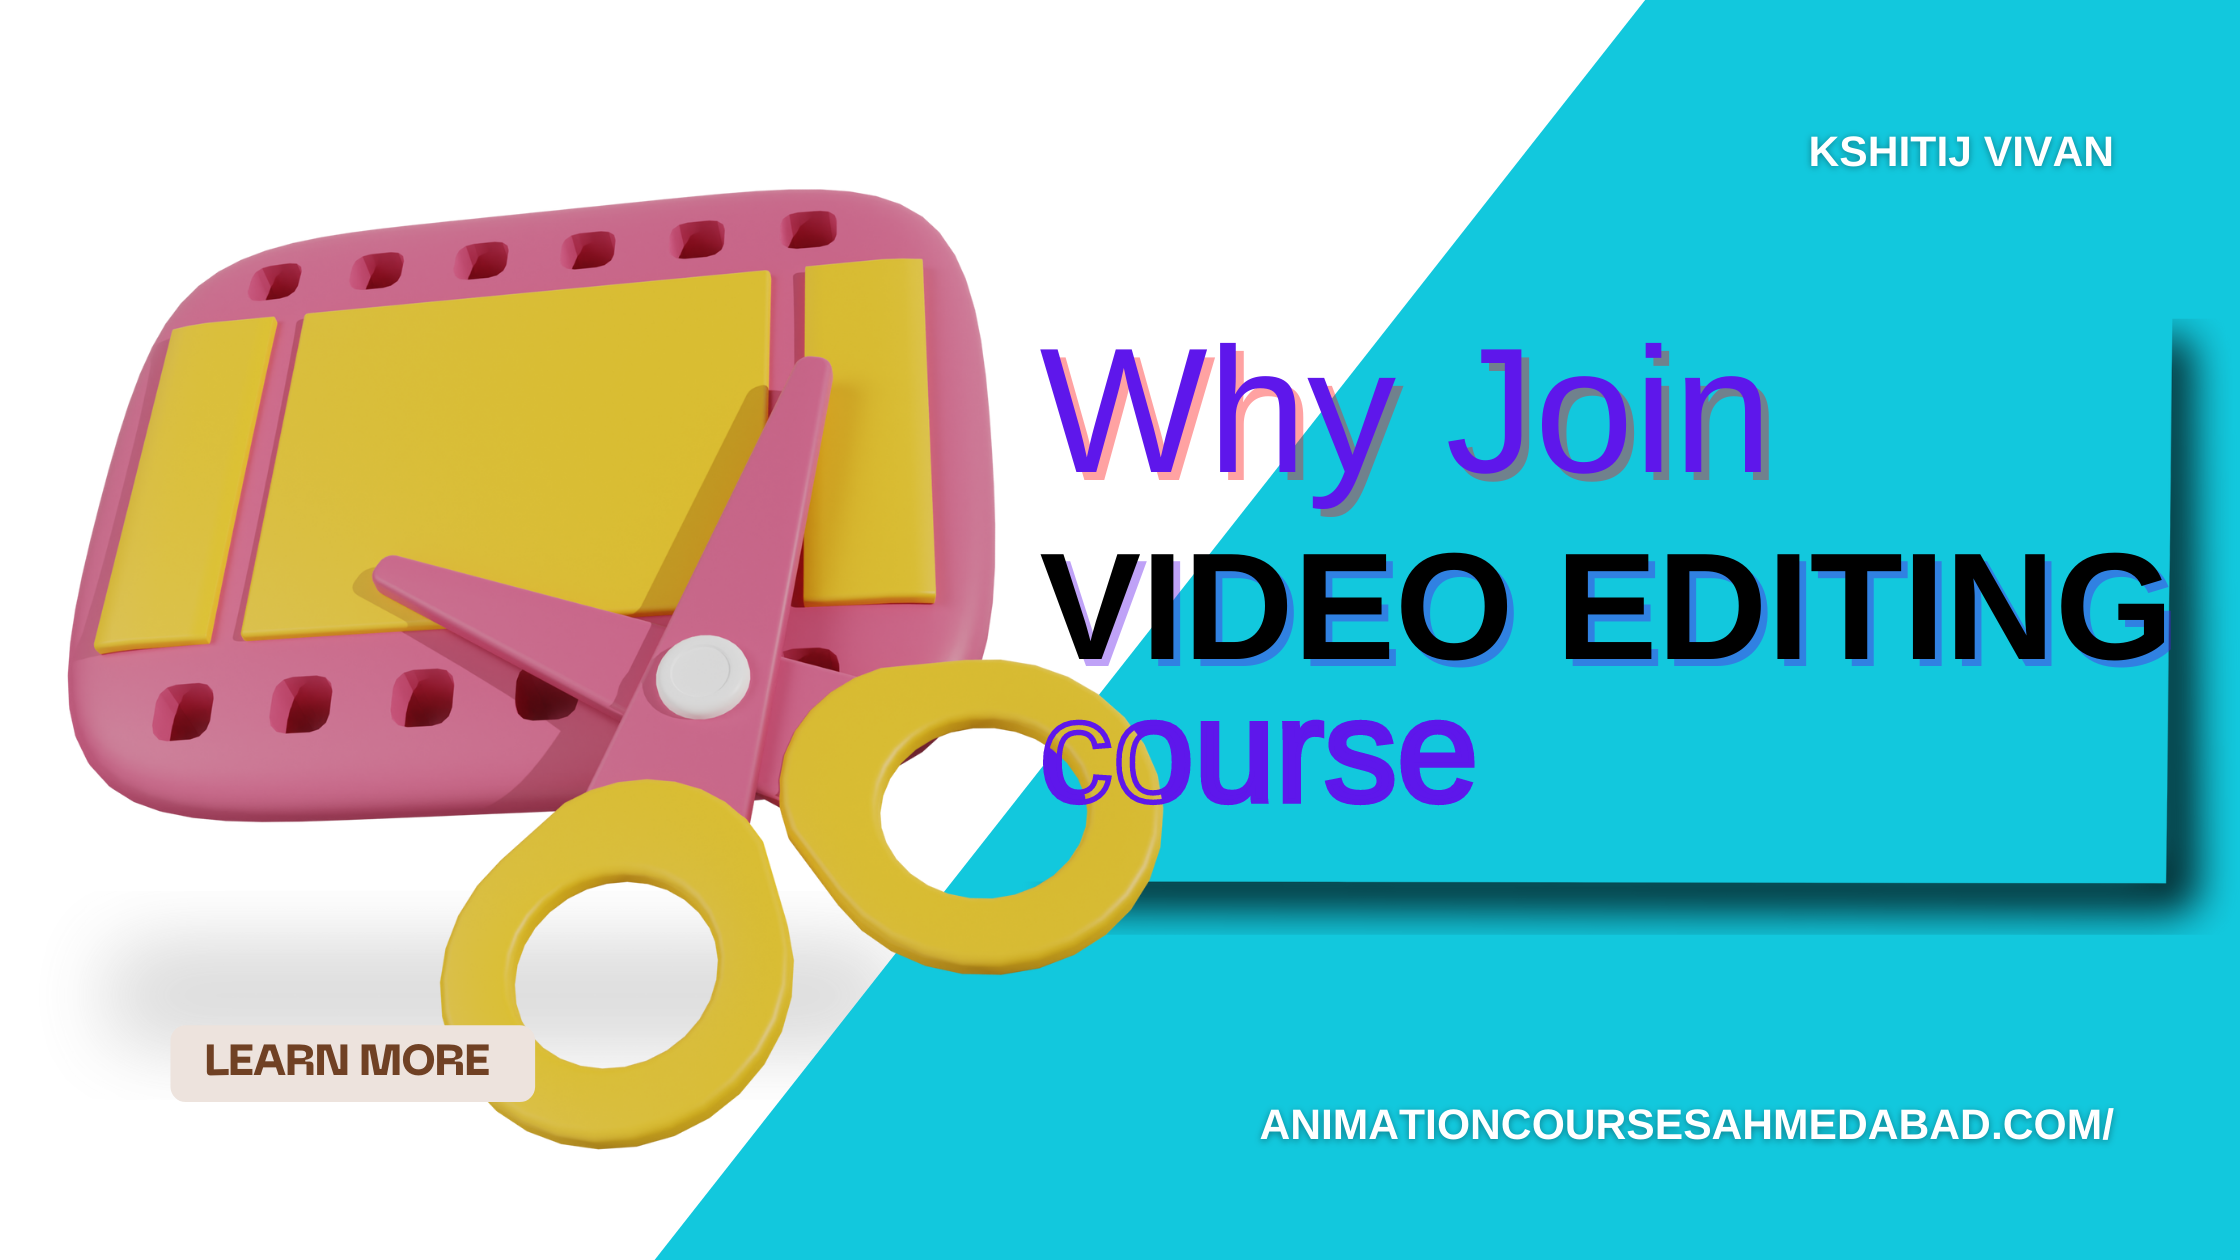 Why You Should Join the Video Editing Course